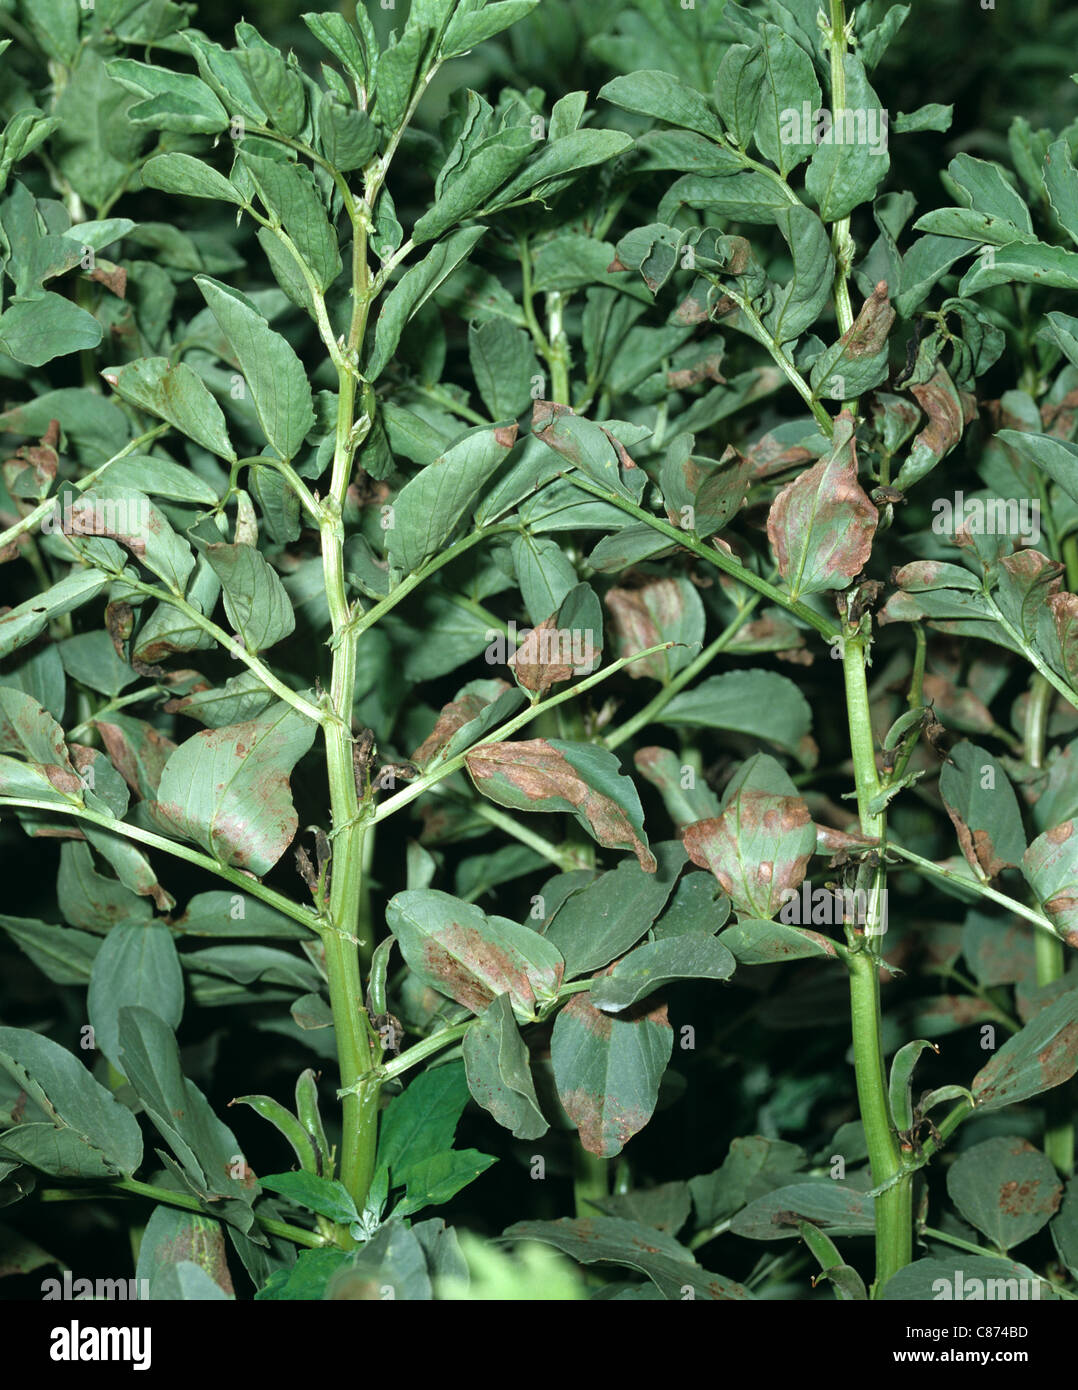 Downy mildew (Peronospora viciae) lesions and damage to field bean crop Stock Photo